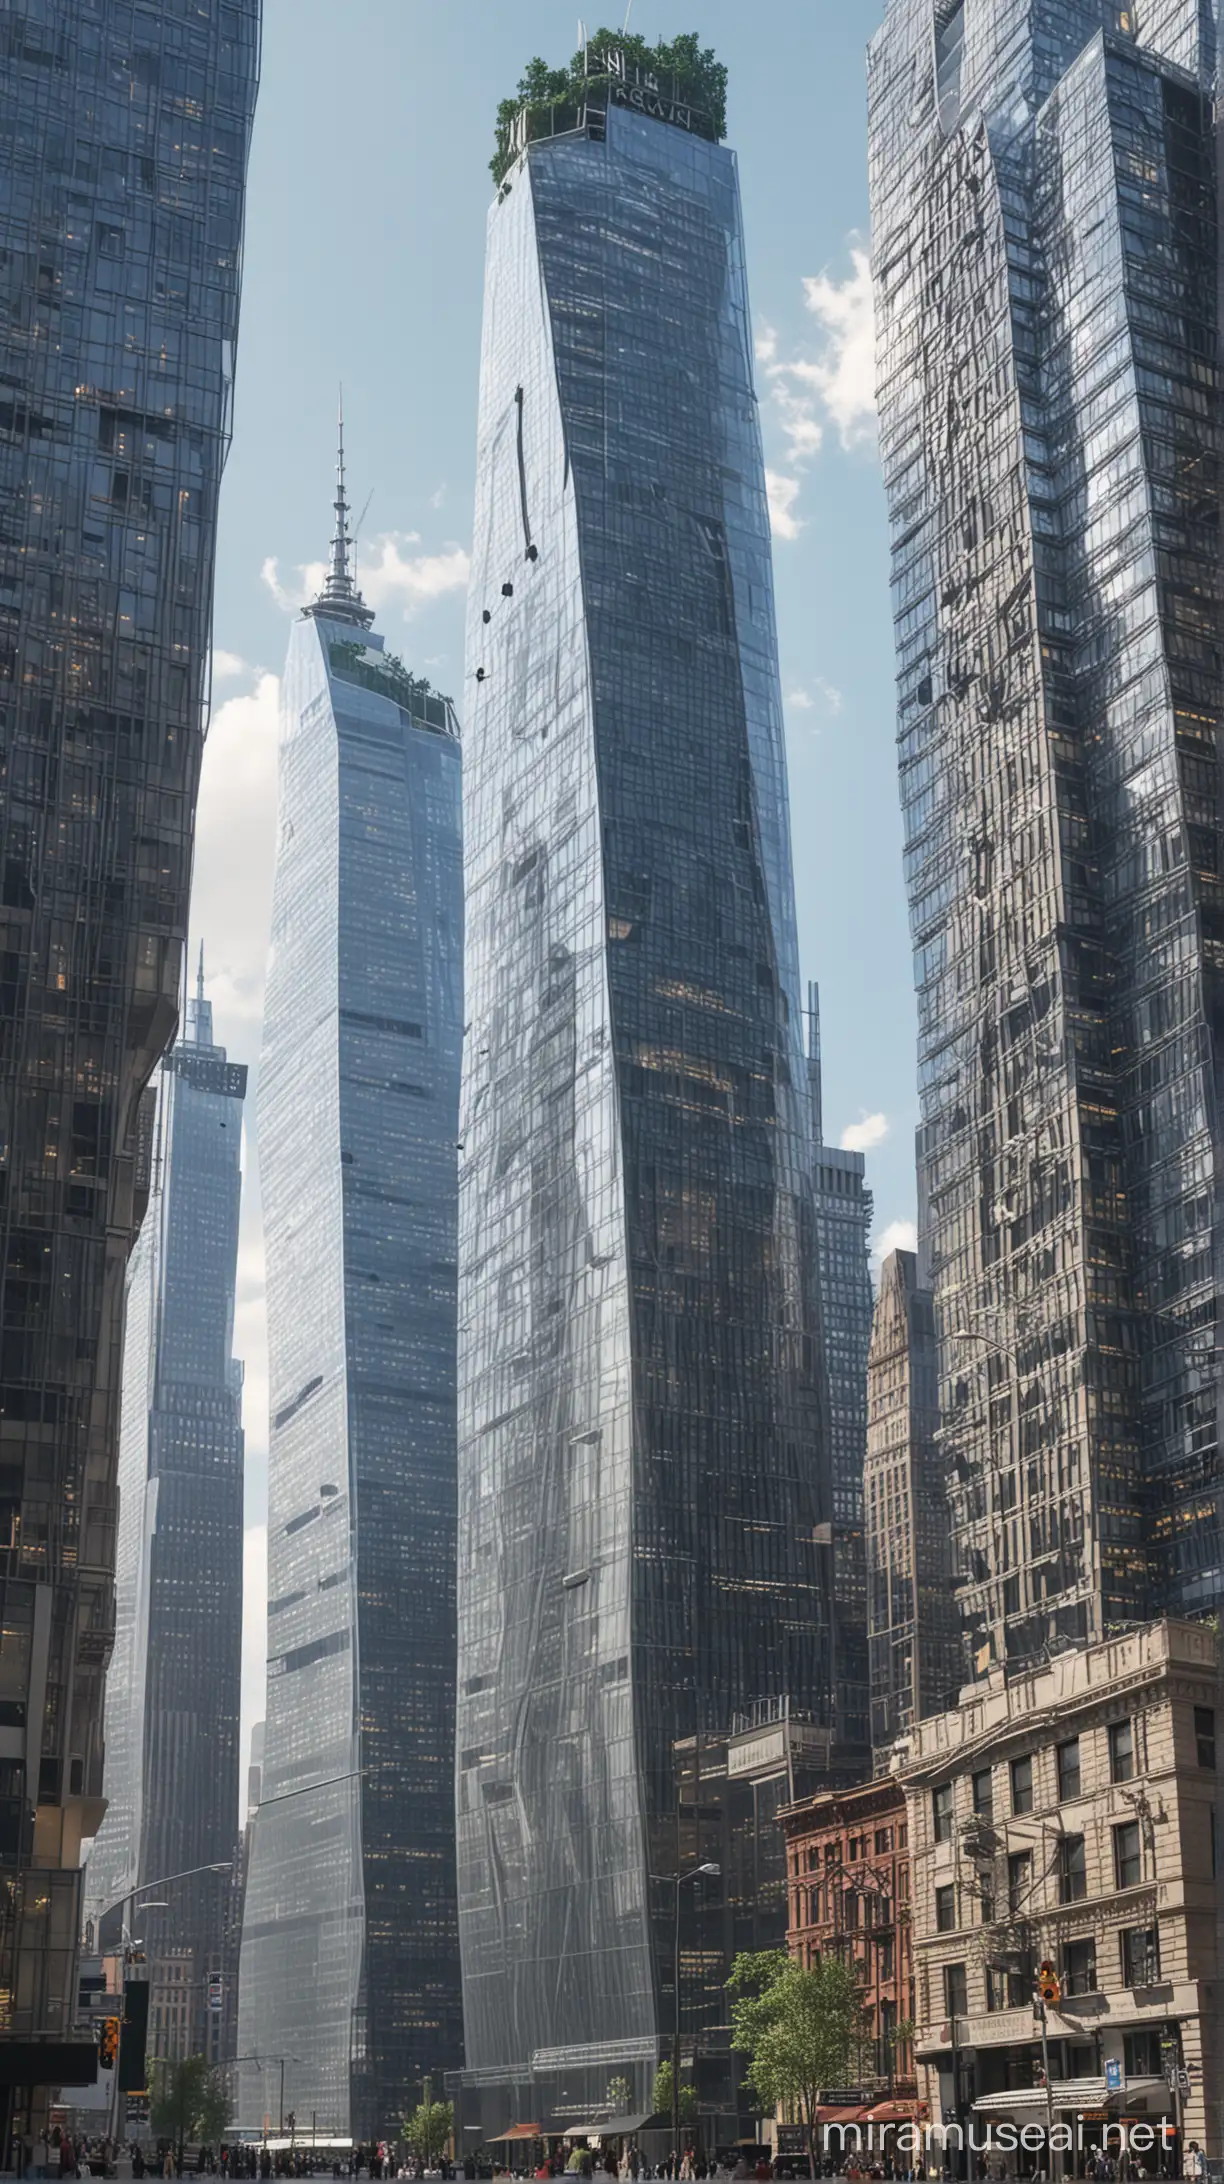 Futuristic New York Skyscrapers with Mellstroy Inscription